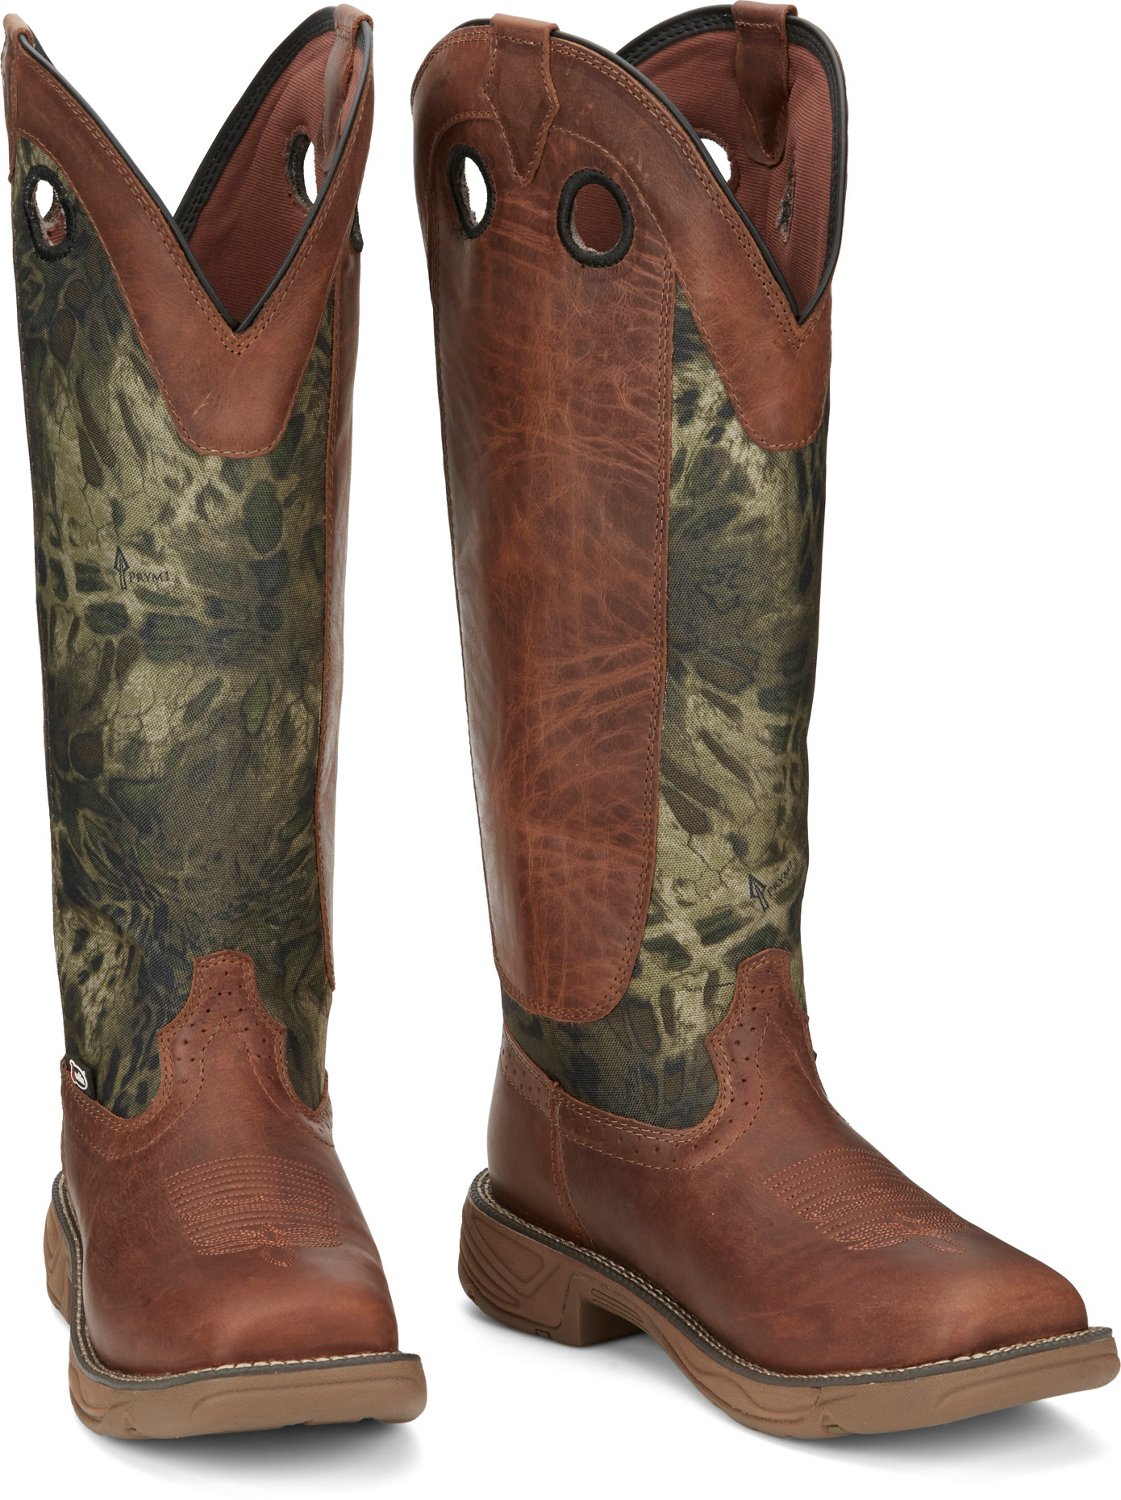 Justin Boots Men's Stampede Rush Strike Work Boots | Academy